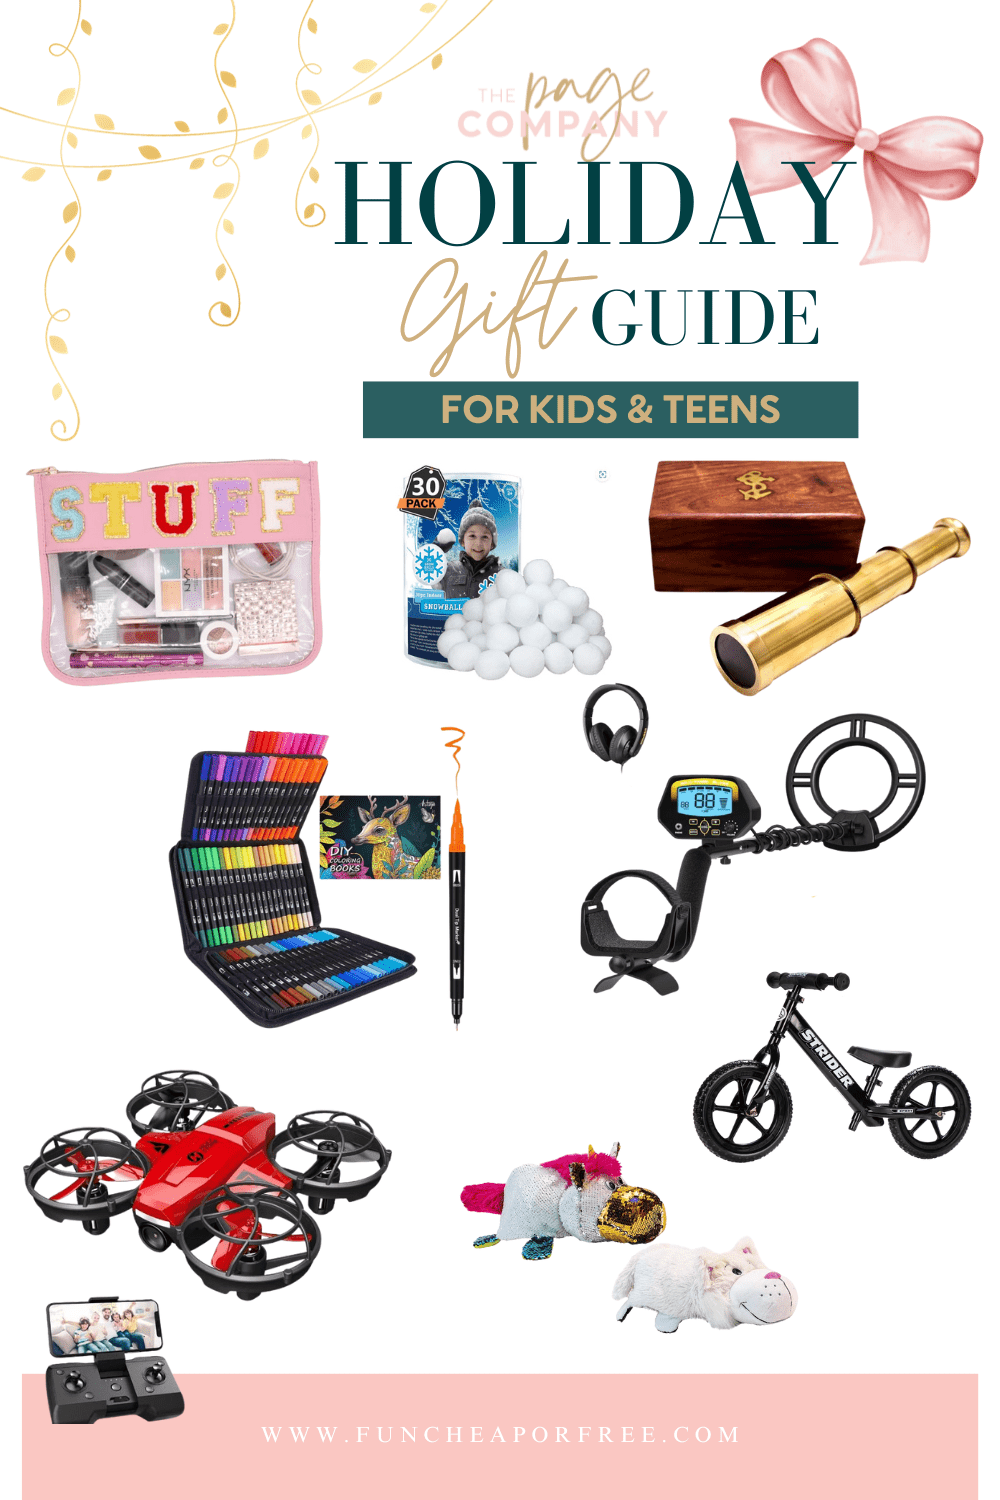 Christmas Gift Guide For 8-10 Year Old Girls - Wiley Adventures